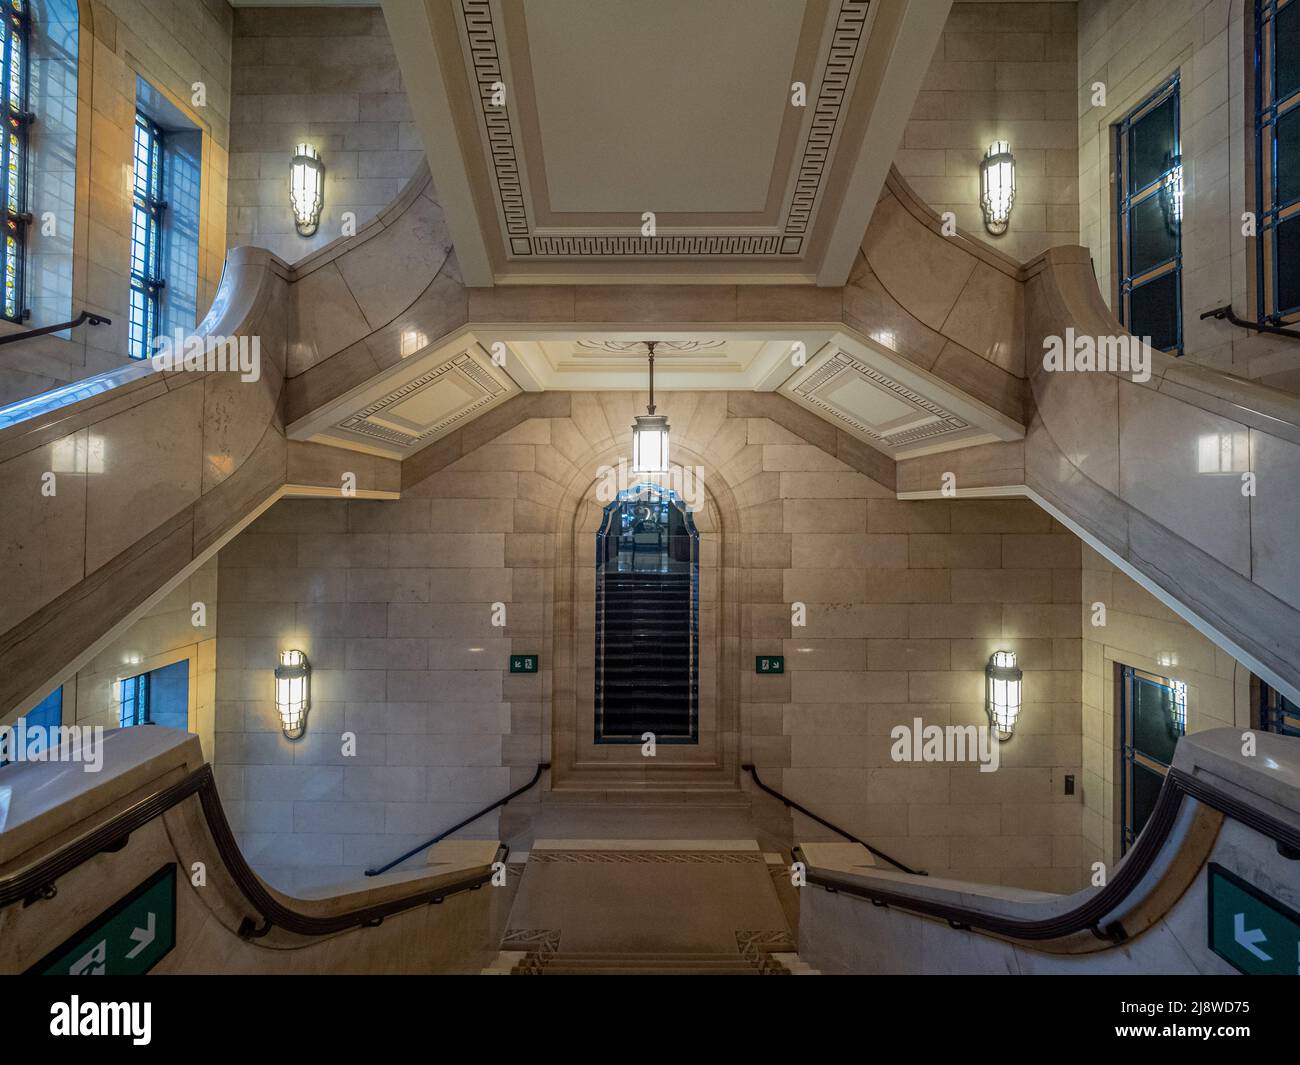 Art Deco open-well staircase of the Freemasons' Hall in London UK. Stock Photo